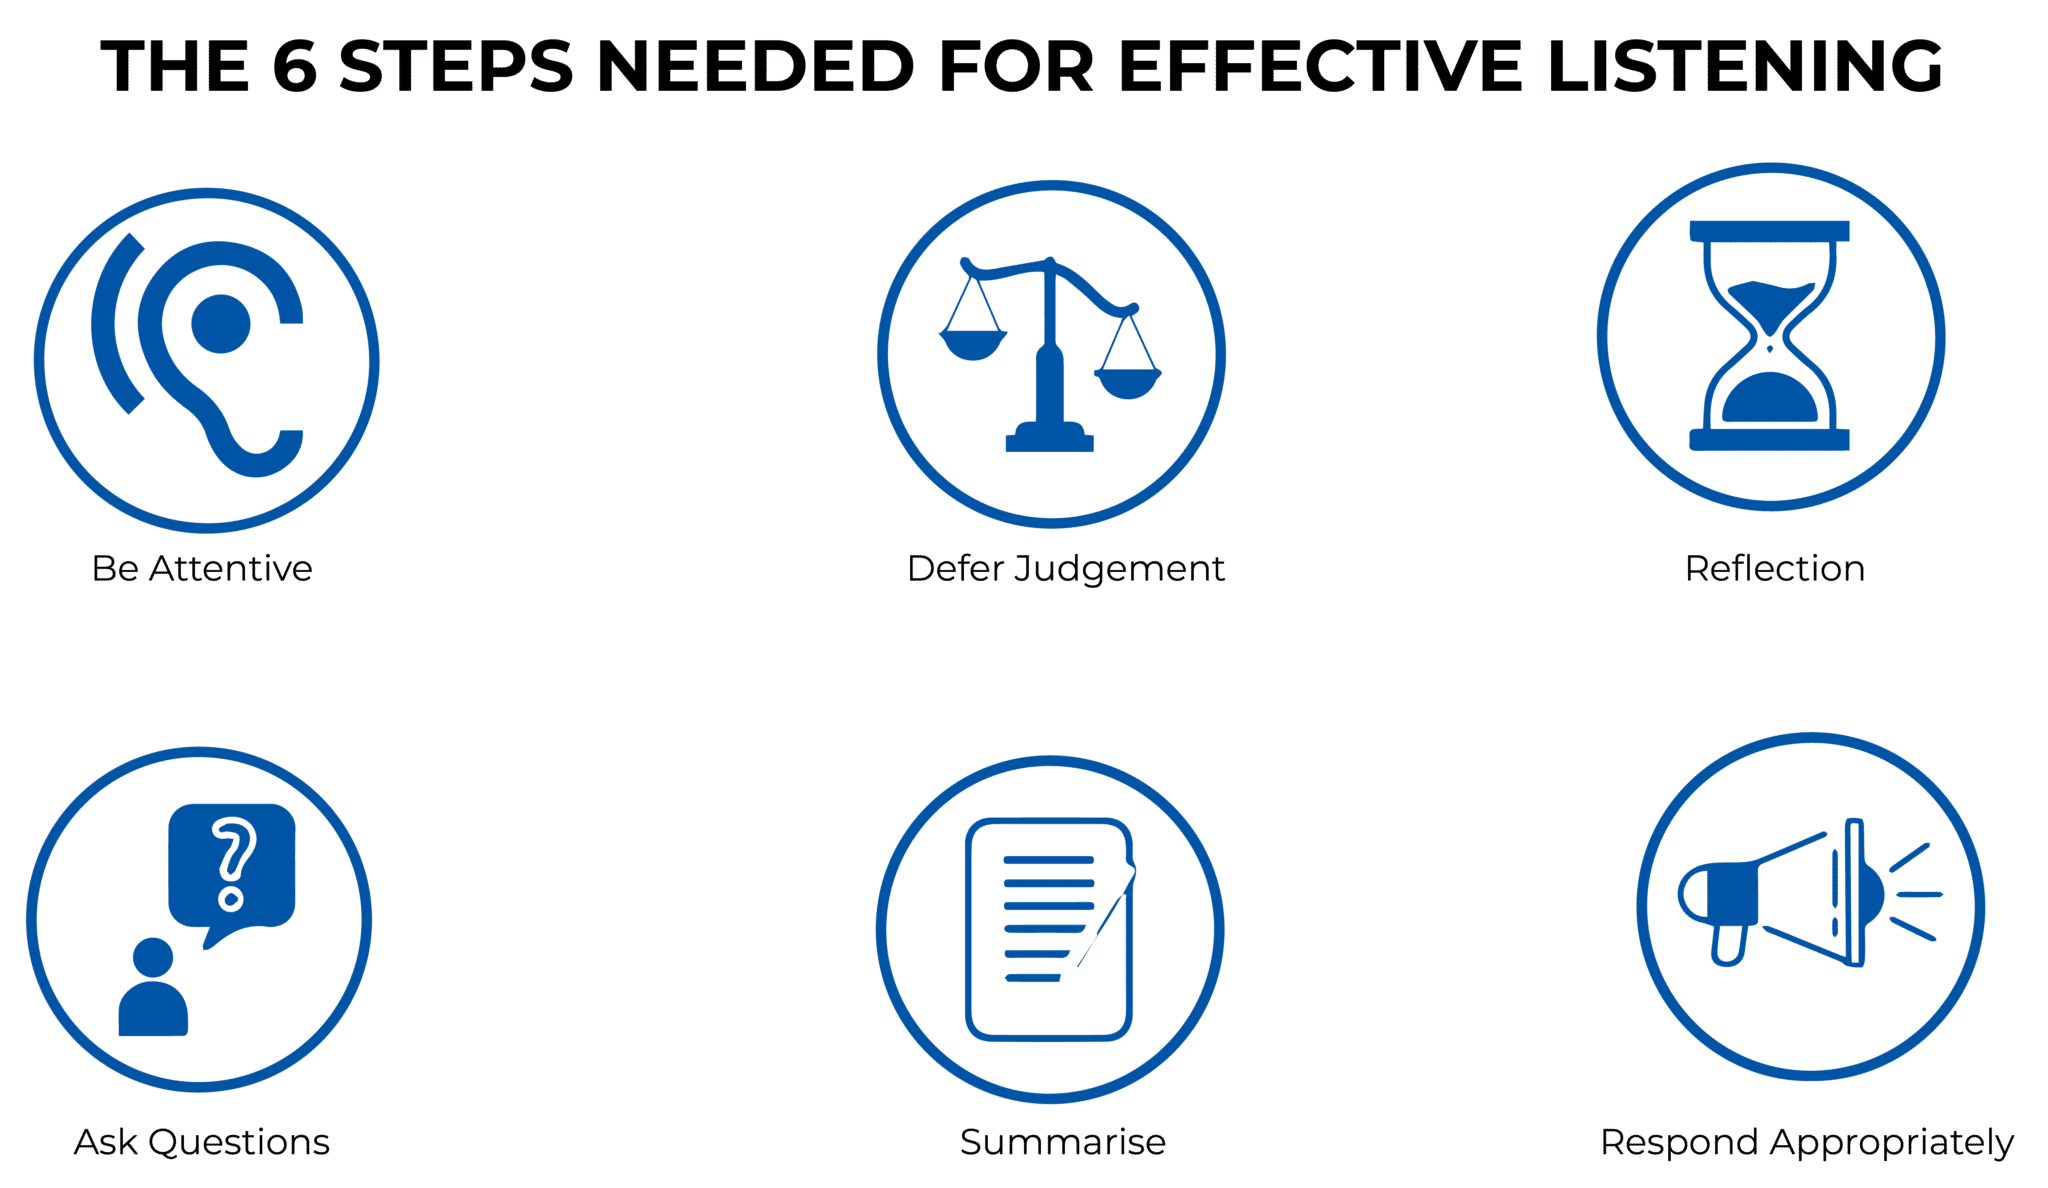 THE 6 STEPS NEEDED FOR EFFECTIVE LISTENING